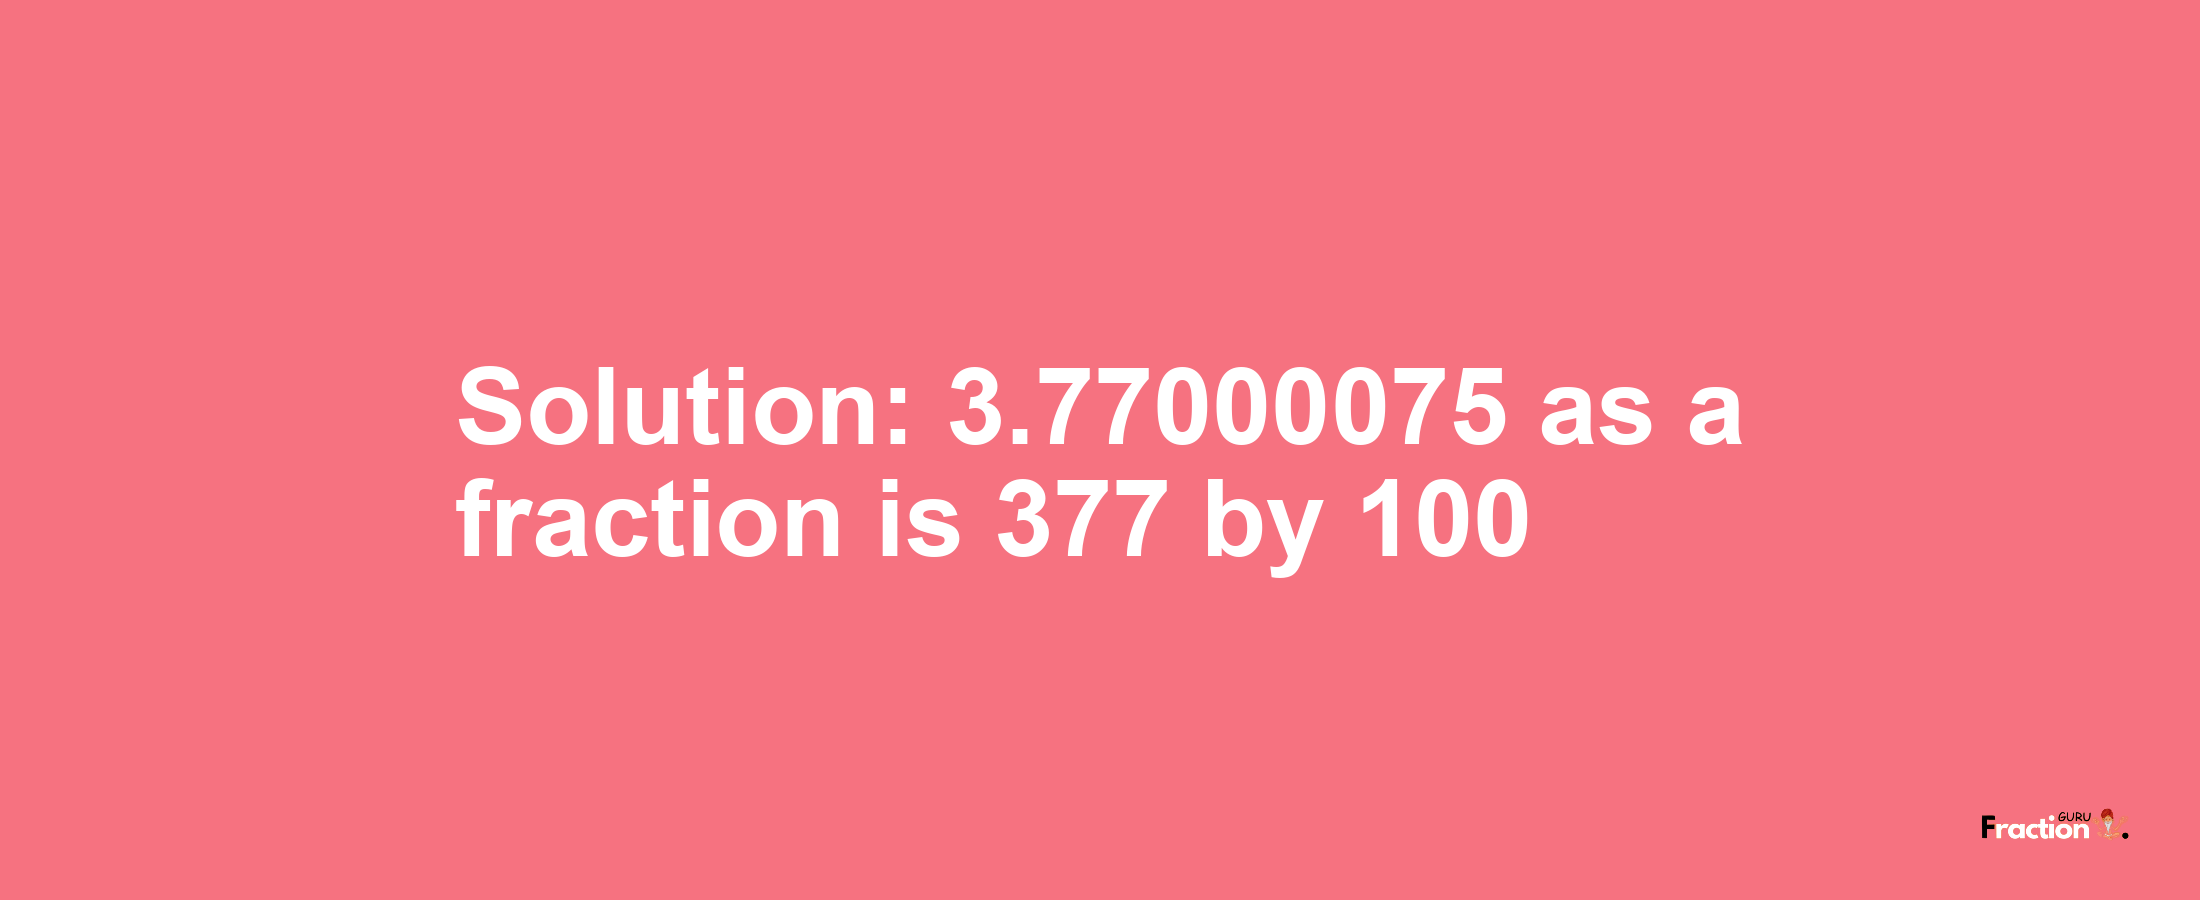 Solution:3.77000075 as a fraction is 377/100